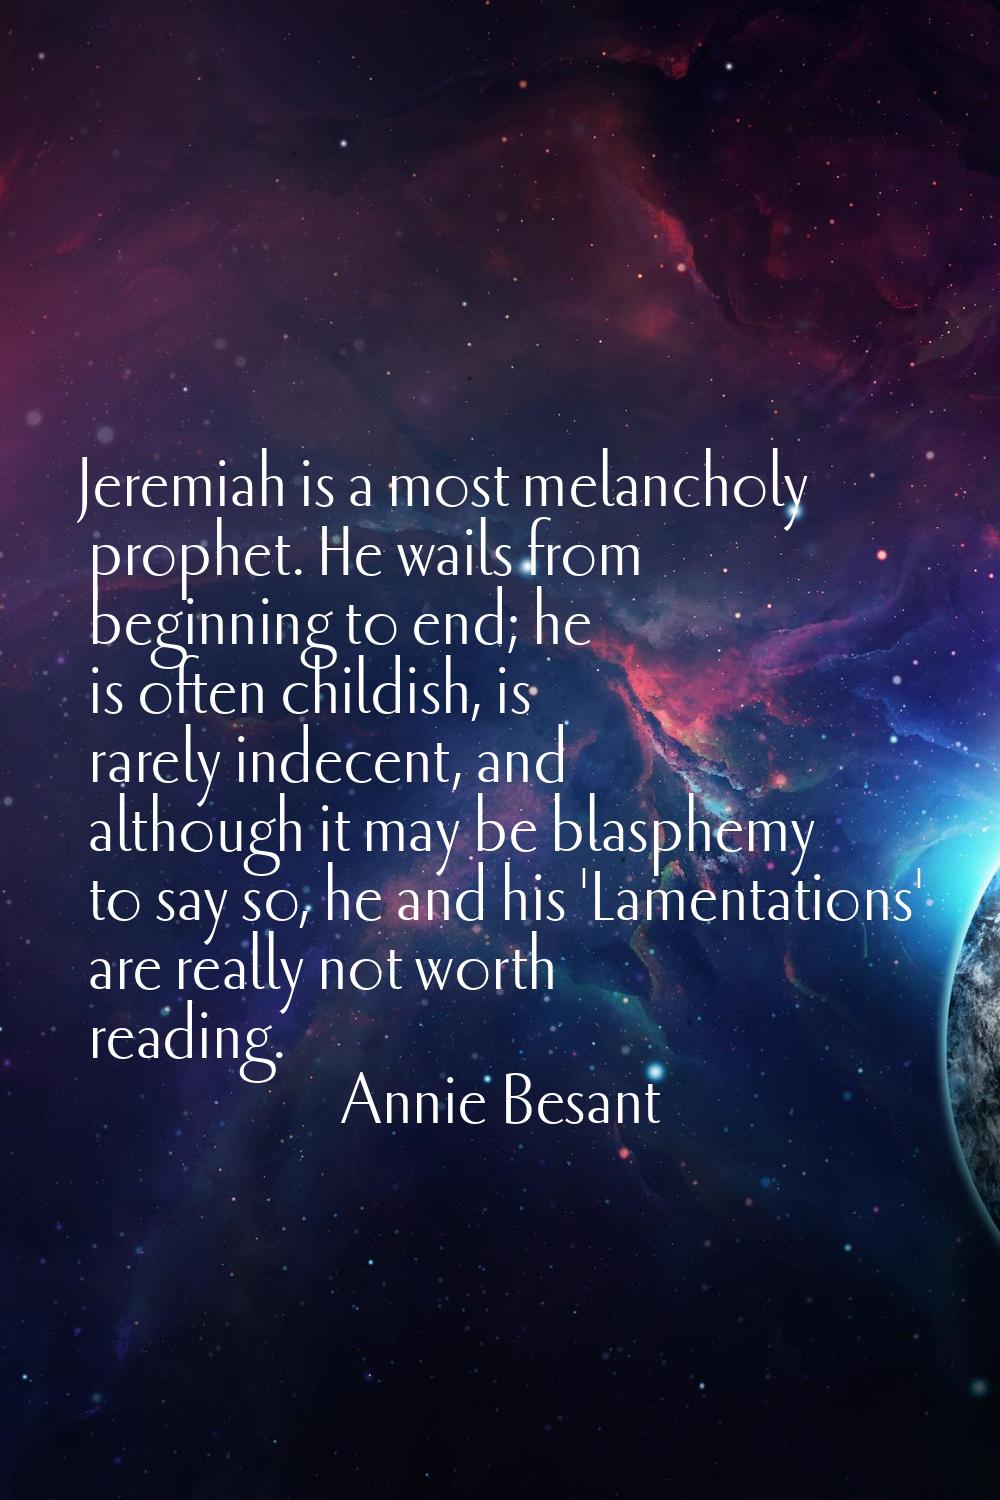 Jeremiah is a most melancholy prophet. He wails from beginning to end; he is often childish, is rar